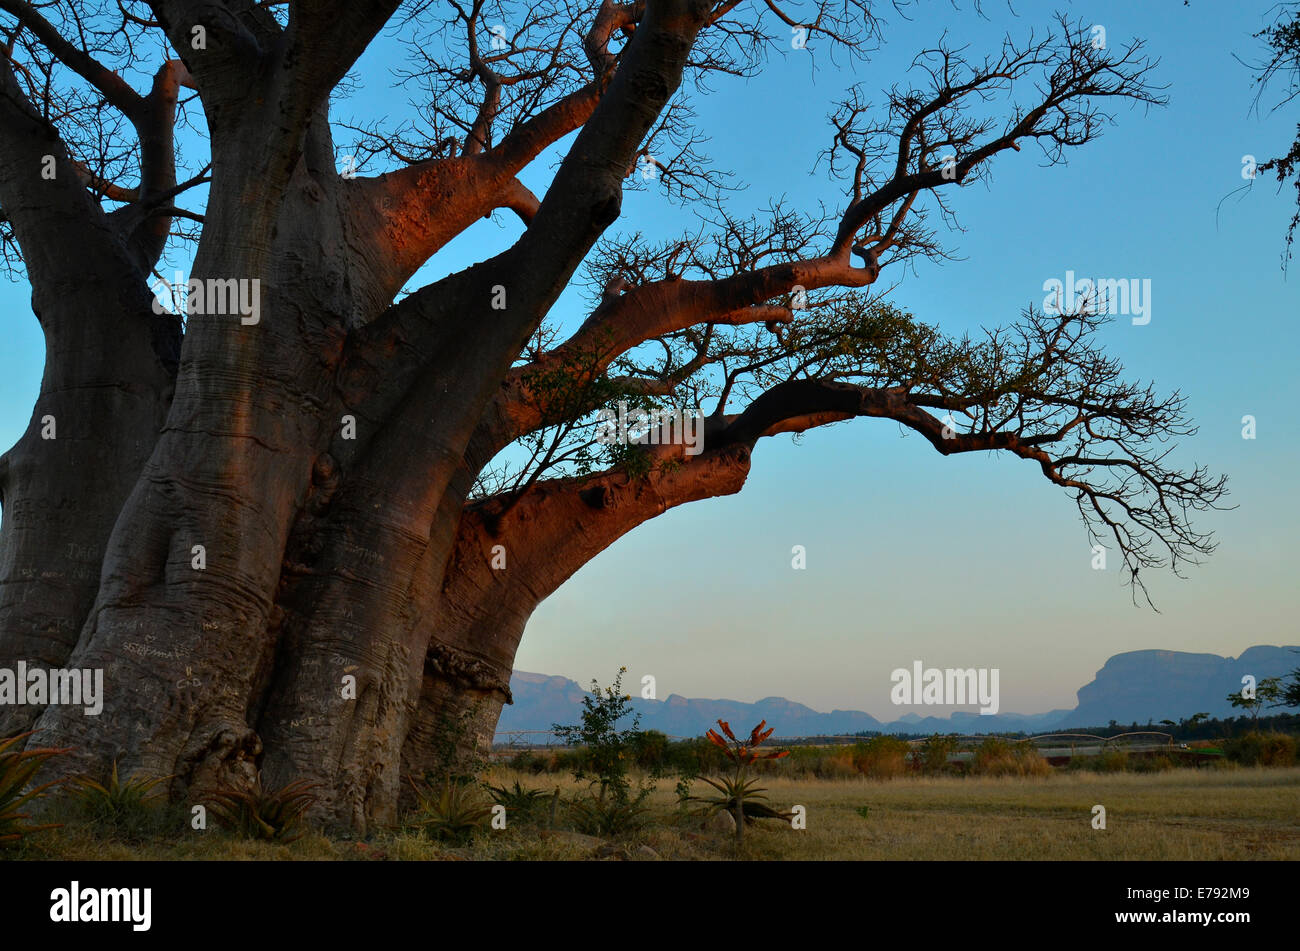 Baobab tree against evening skyline and pale blue mountains, Limpopo province, South Africa Stock Photo